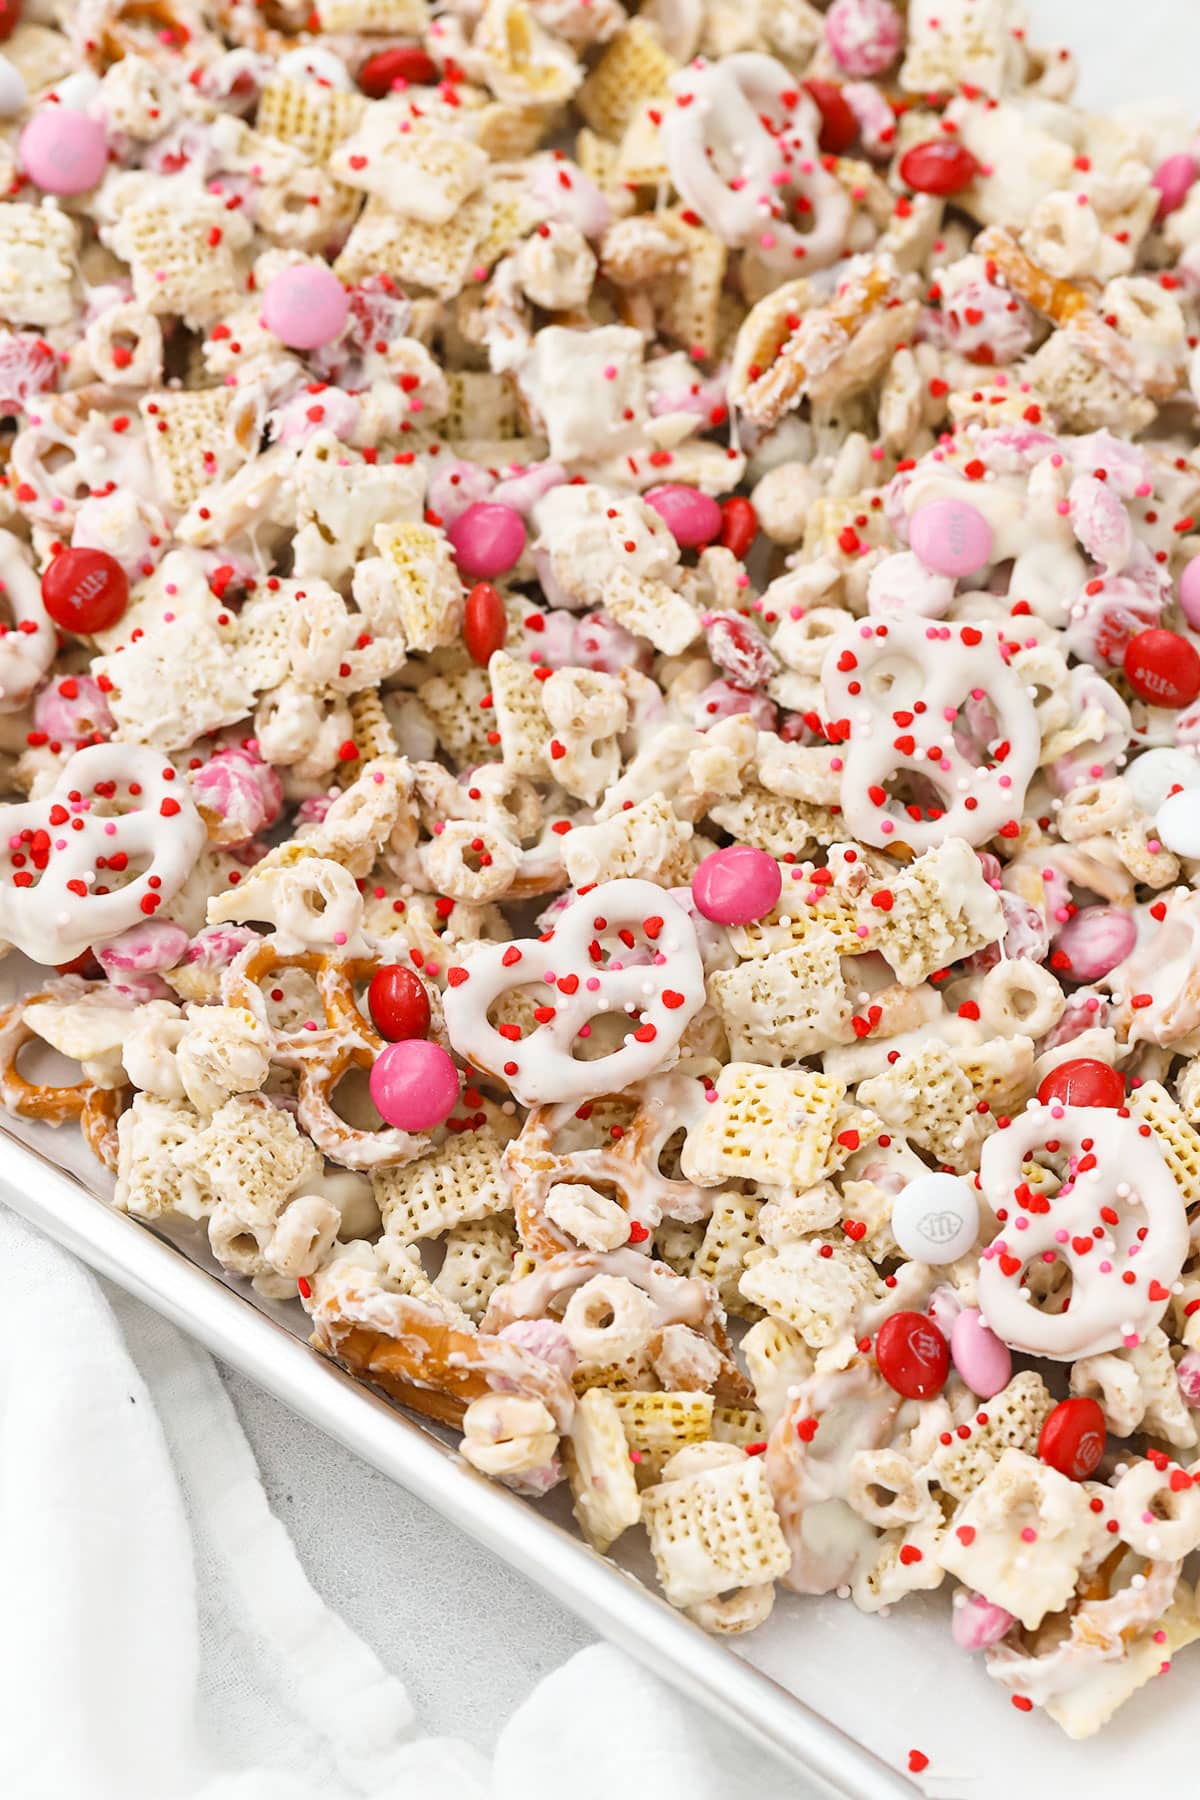 Spreading Valentines snack mix on a baking sheet